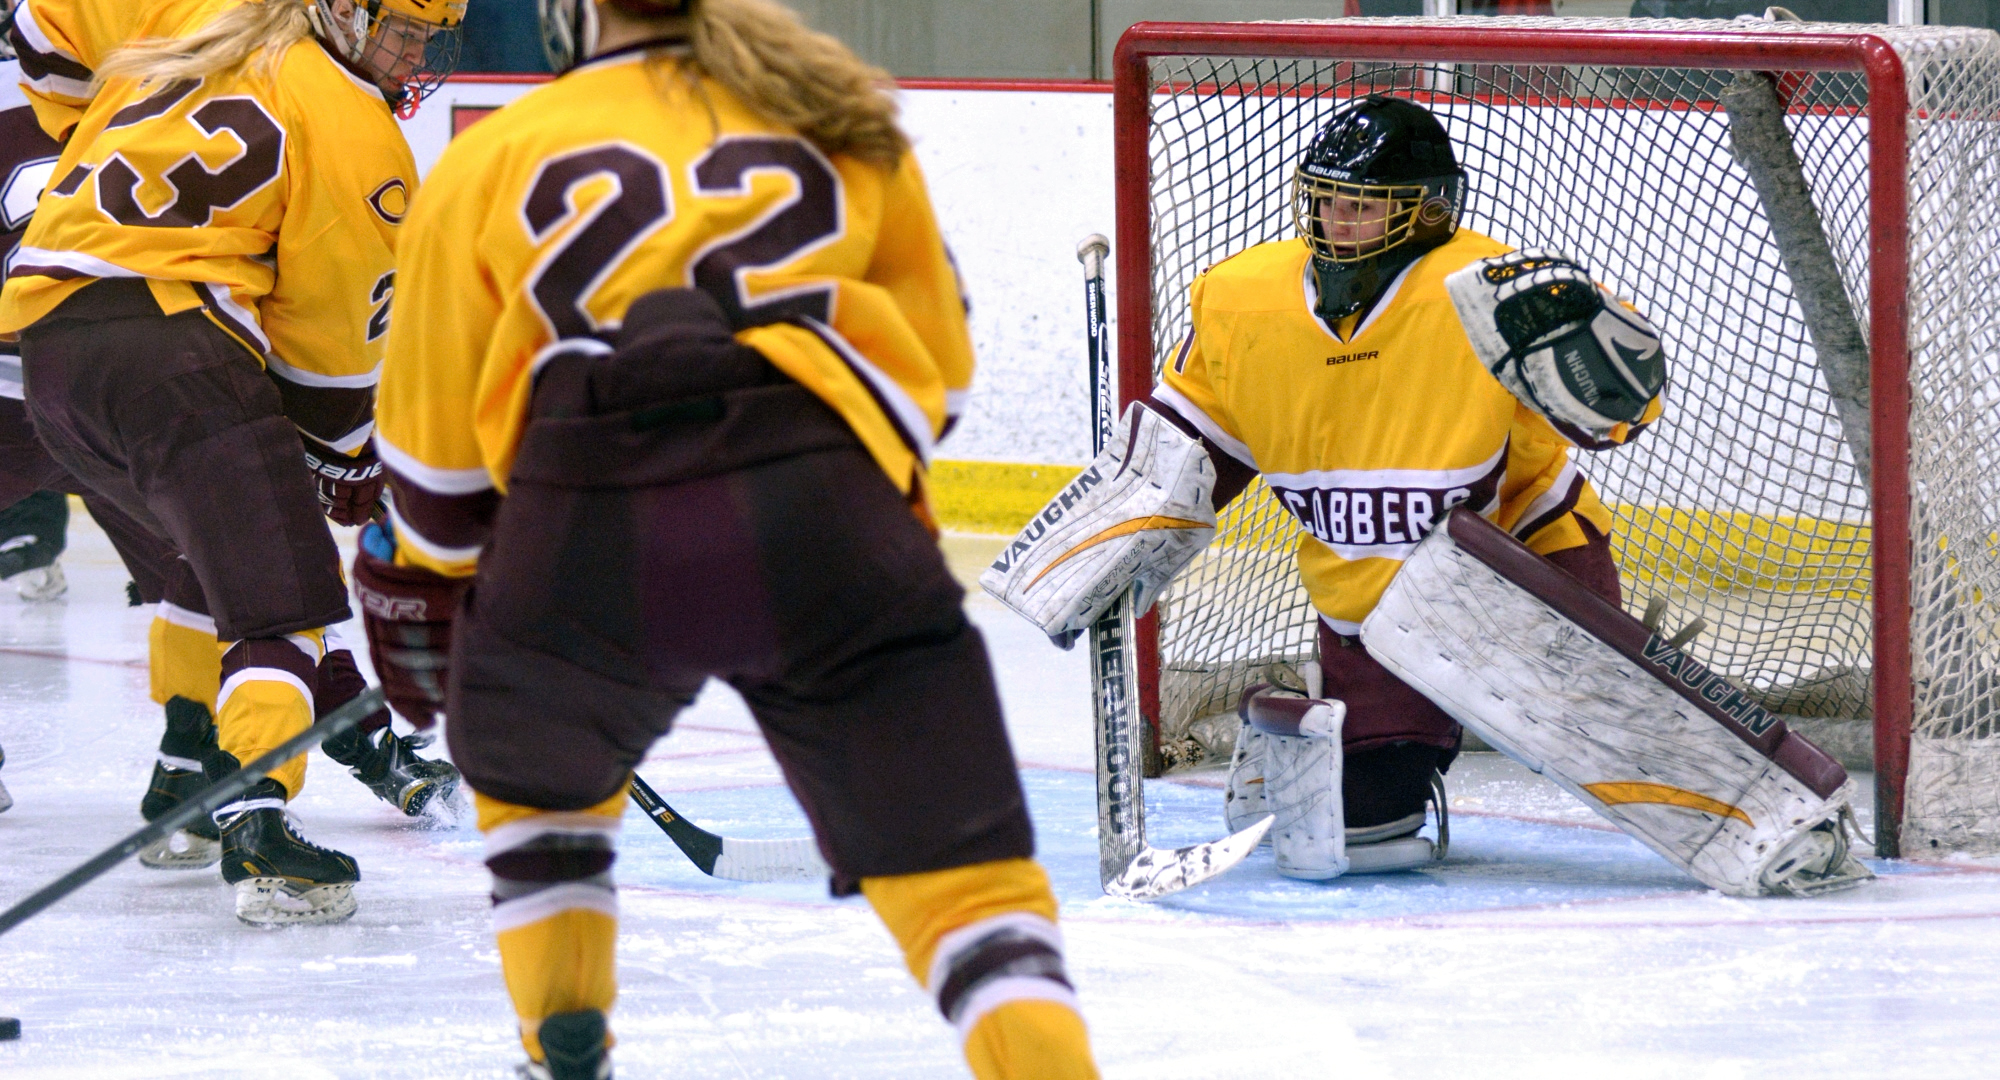 Senior goalie Andrea Klug turned aside 34 of the 36 shots she faced to help Concordia earn a 2-2 OT tie at Gustavus.